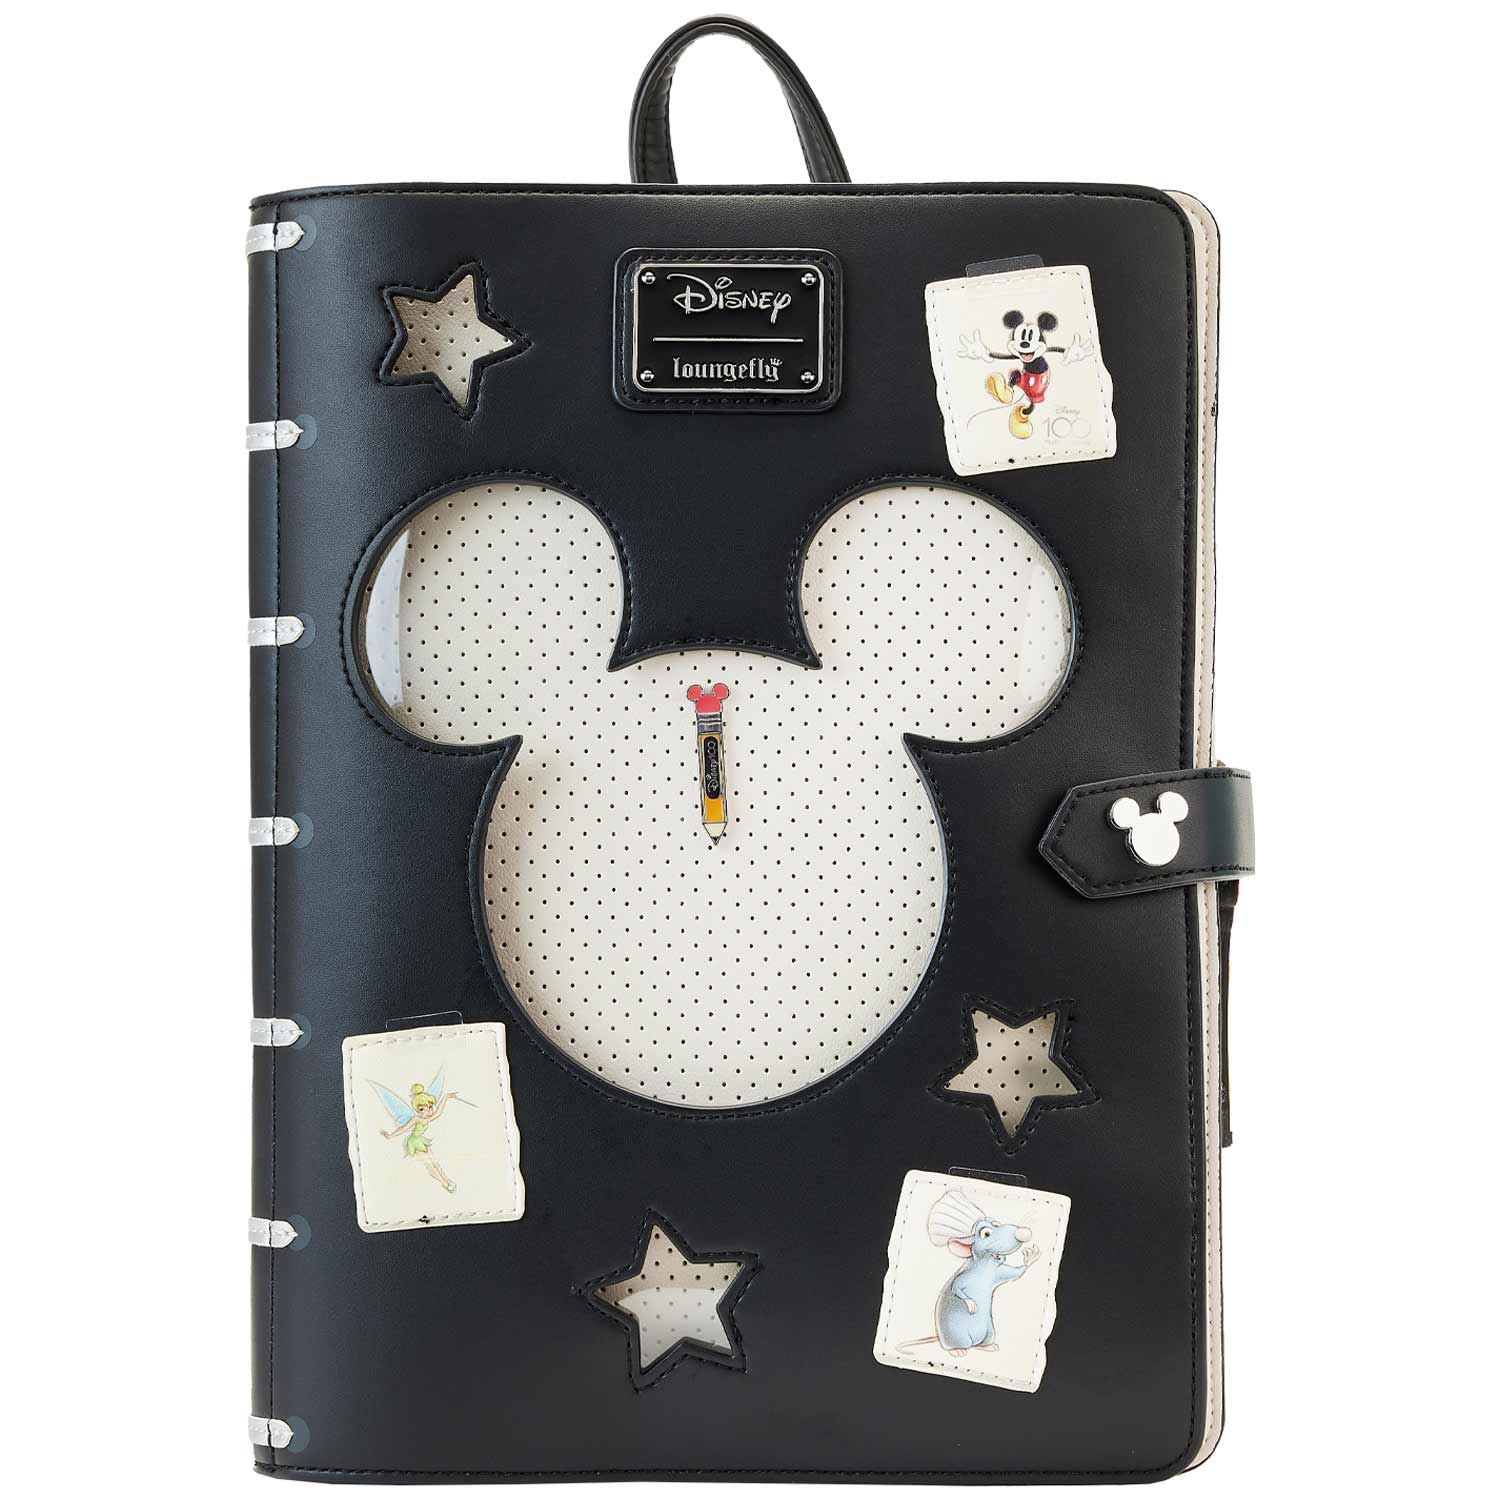 Loungefly x Disney 100th Anniversary Sketchbook Pin Trader Backpack - GeekCore